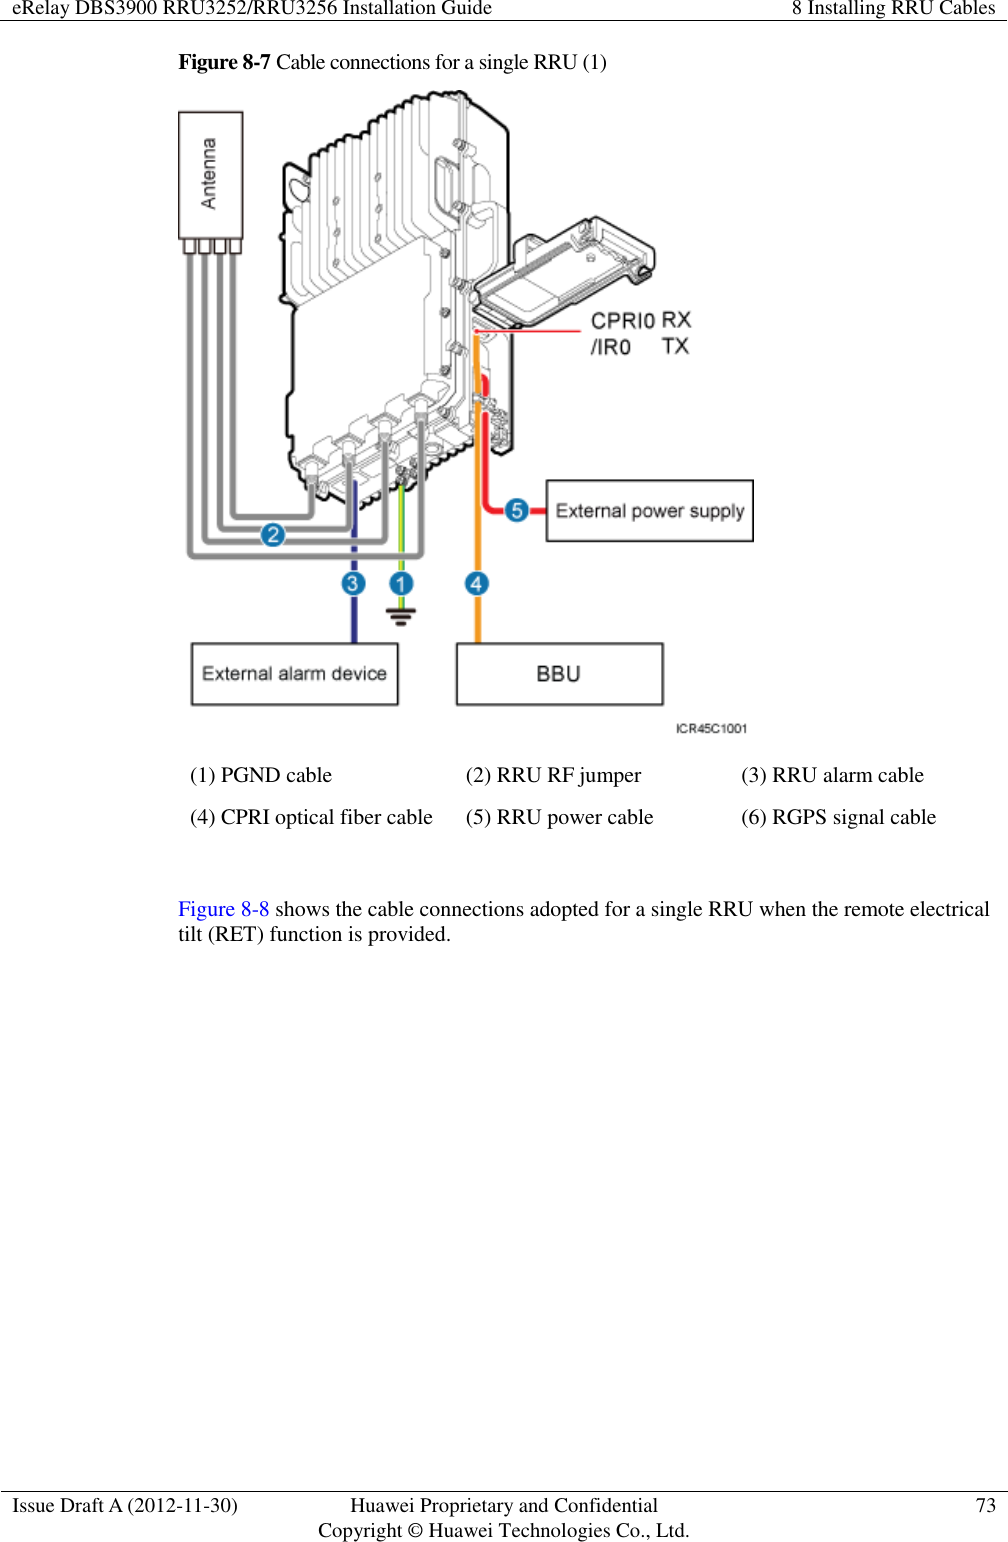 eRelay DBS3900 RRU3252/RRU3256 Installation Guide 8 Installing RRU Cables  Issue Draft A (2012-11-30) Huawei Proprietary and Confidential                                     Copyright © Huawei Technologies Co., Ltd. 73  Figure 8-7 Cable connections for a single RRU (1)  (1) PGND cable (2) RRU RF jumper (3) RRU alarm cable (4) CPRI optical fiber cable   (5) RRU power cable (6) RGPS signal cable  Figure 8-8 shows the cable connections adopted for a single RRU when the remote electrical tilt (RET) function is provided. 